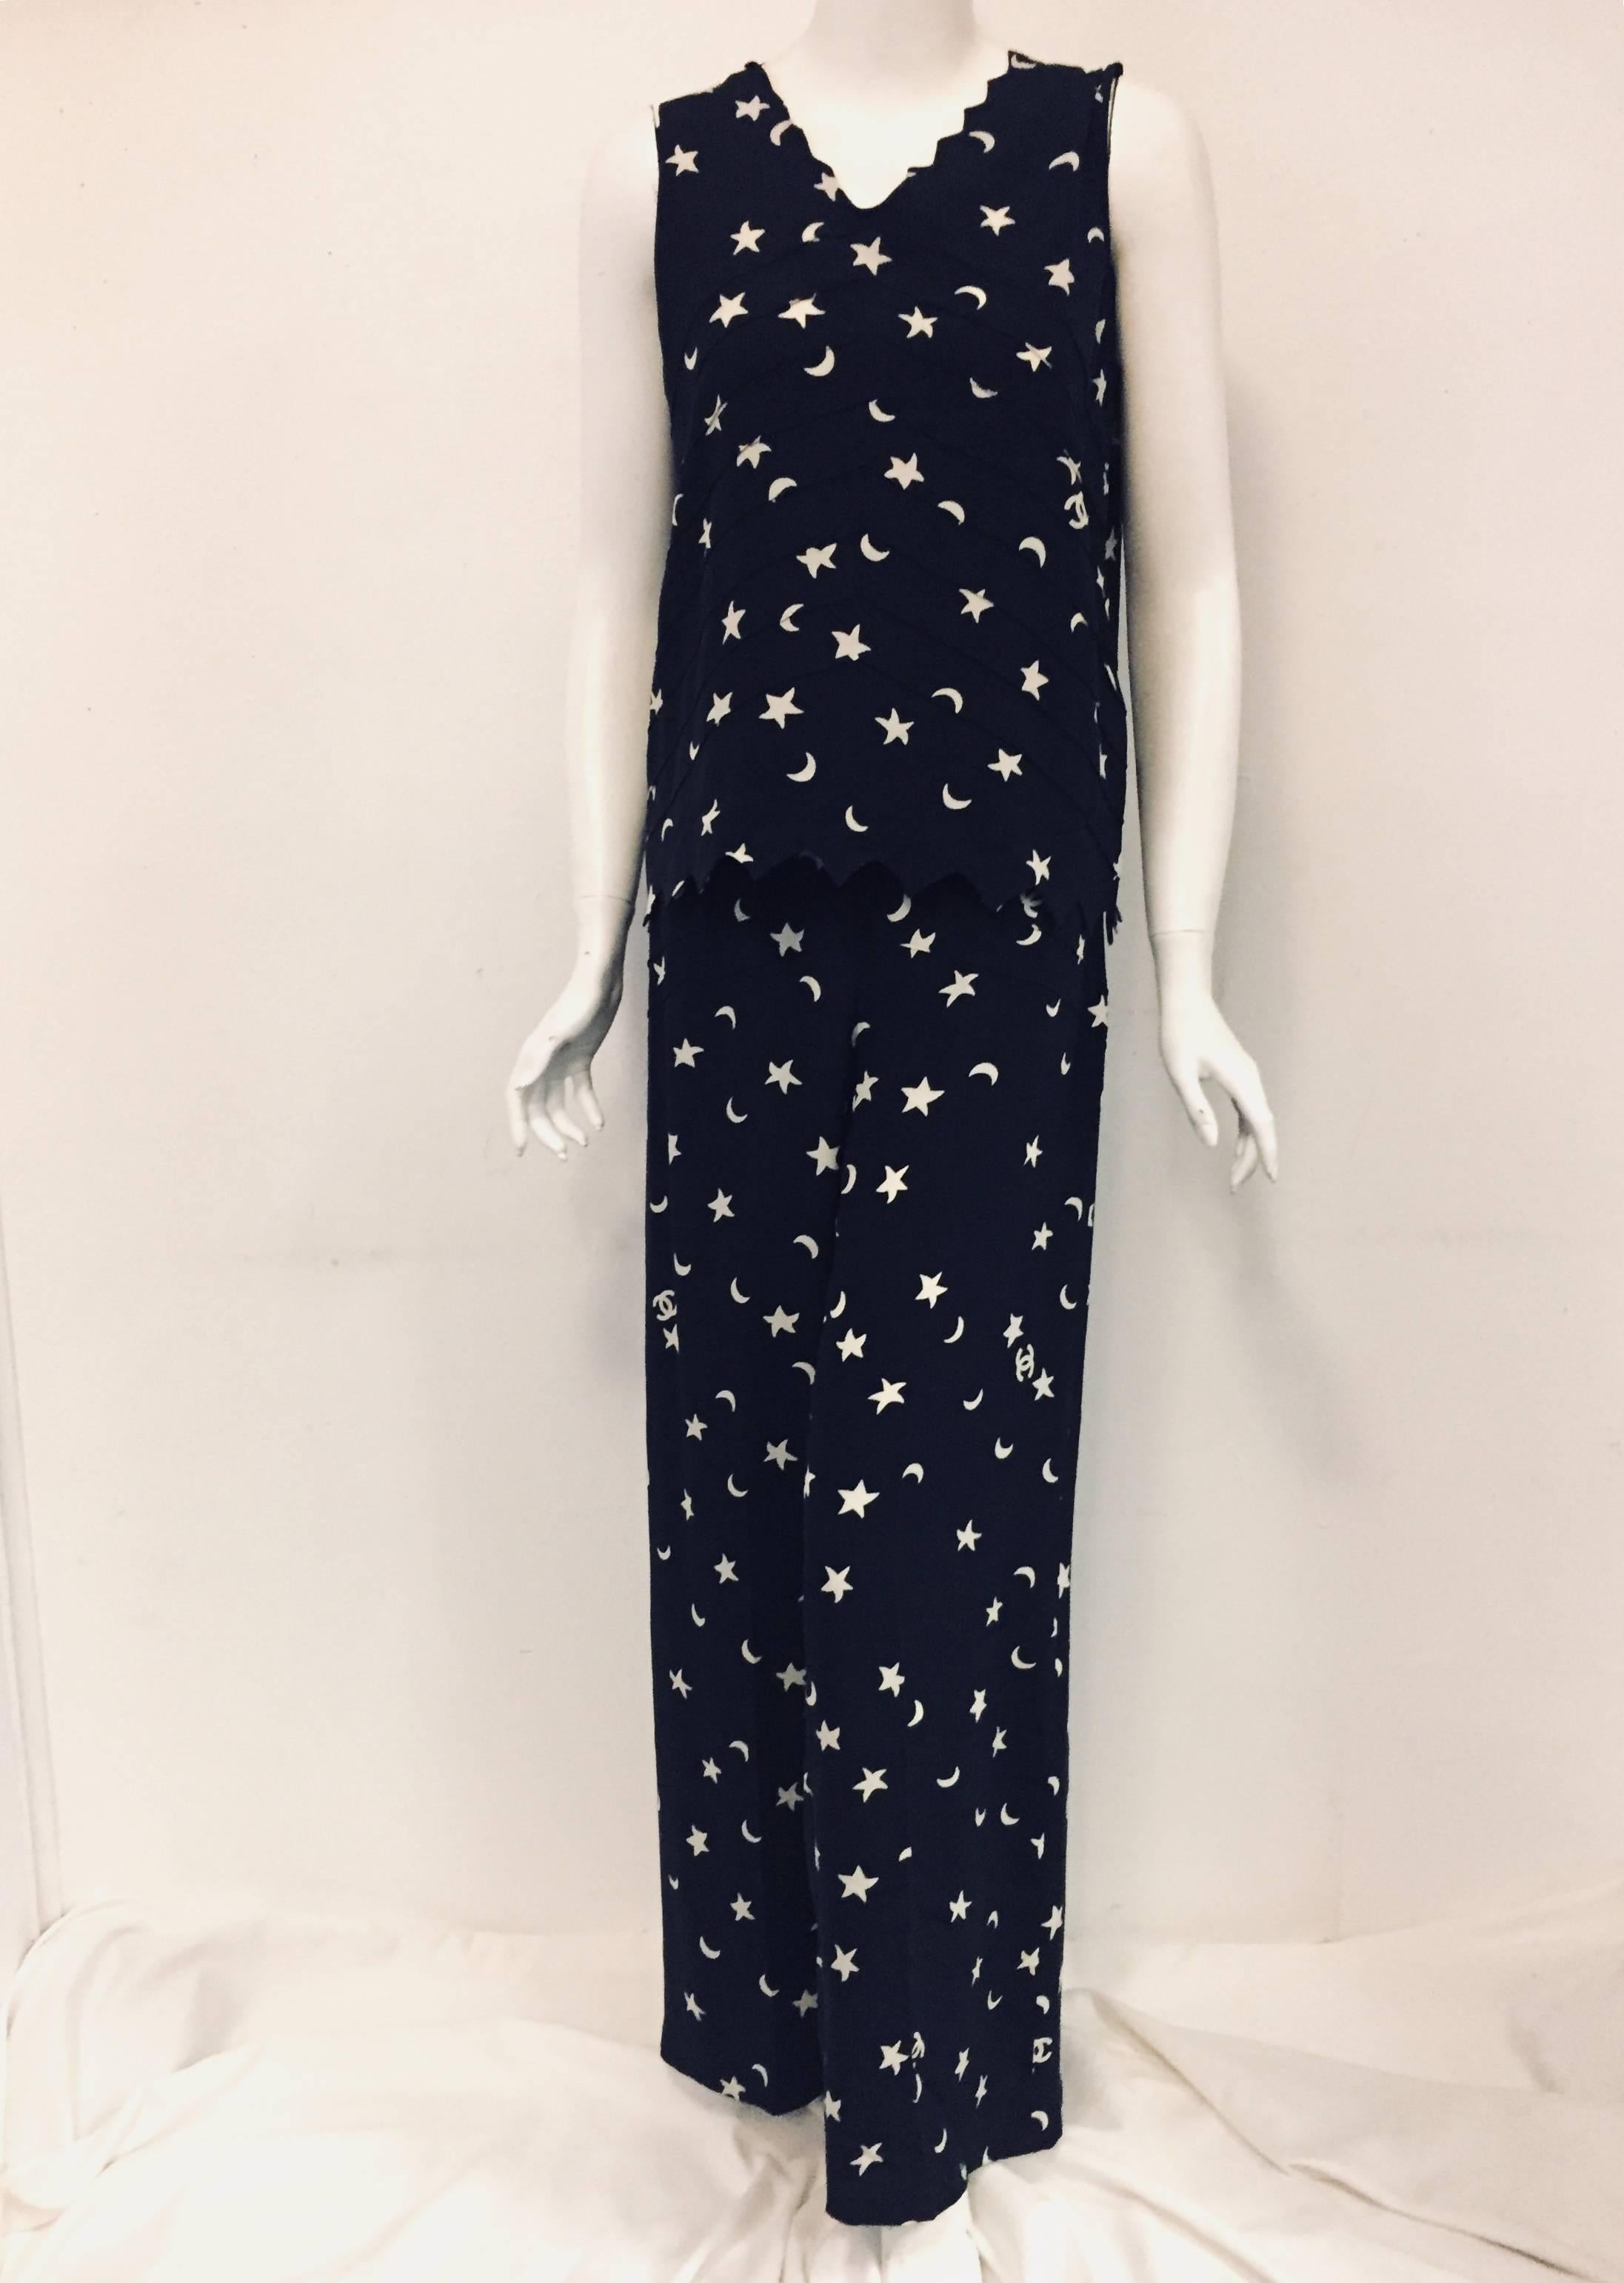 This is a four piece silk ensemble from Chanel 08P divine navy blue base with ivory stars and crescent moons  was created for the Chanel runway spring 2008 with the, out of this world, palazzo pants.  These mid waisted and shaped over the hips